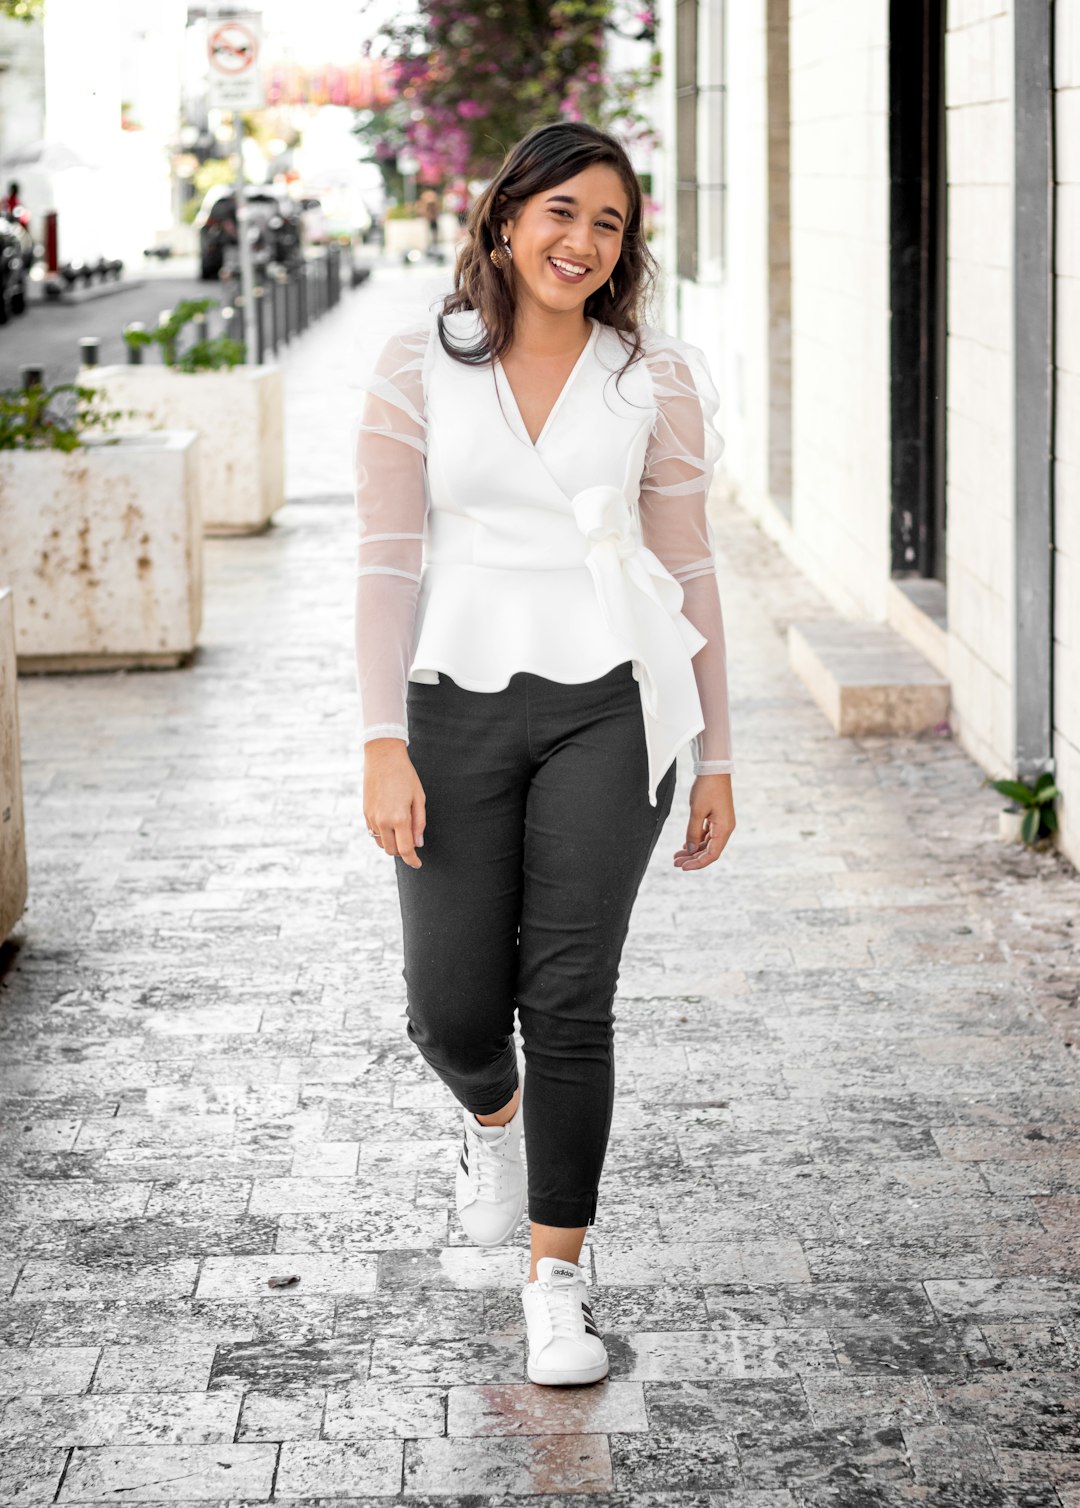 woman in white shirt and black pants standing on sidewalk during daytime